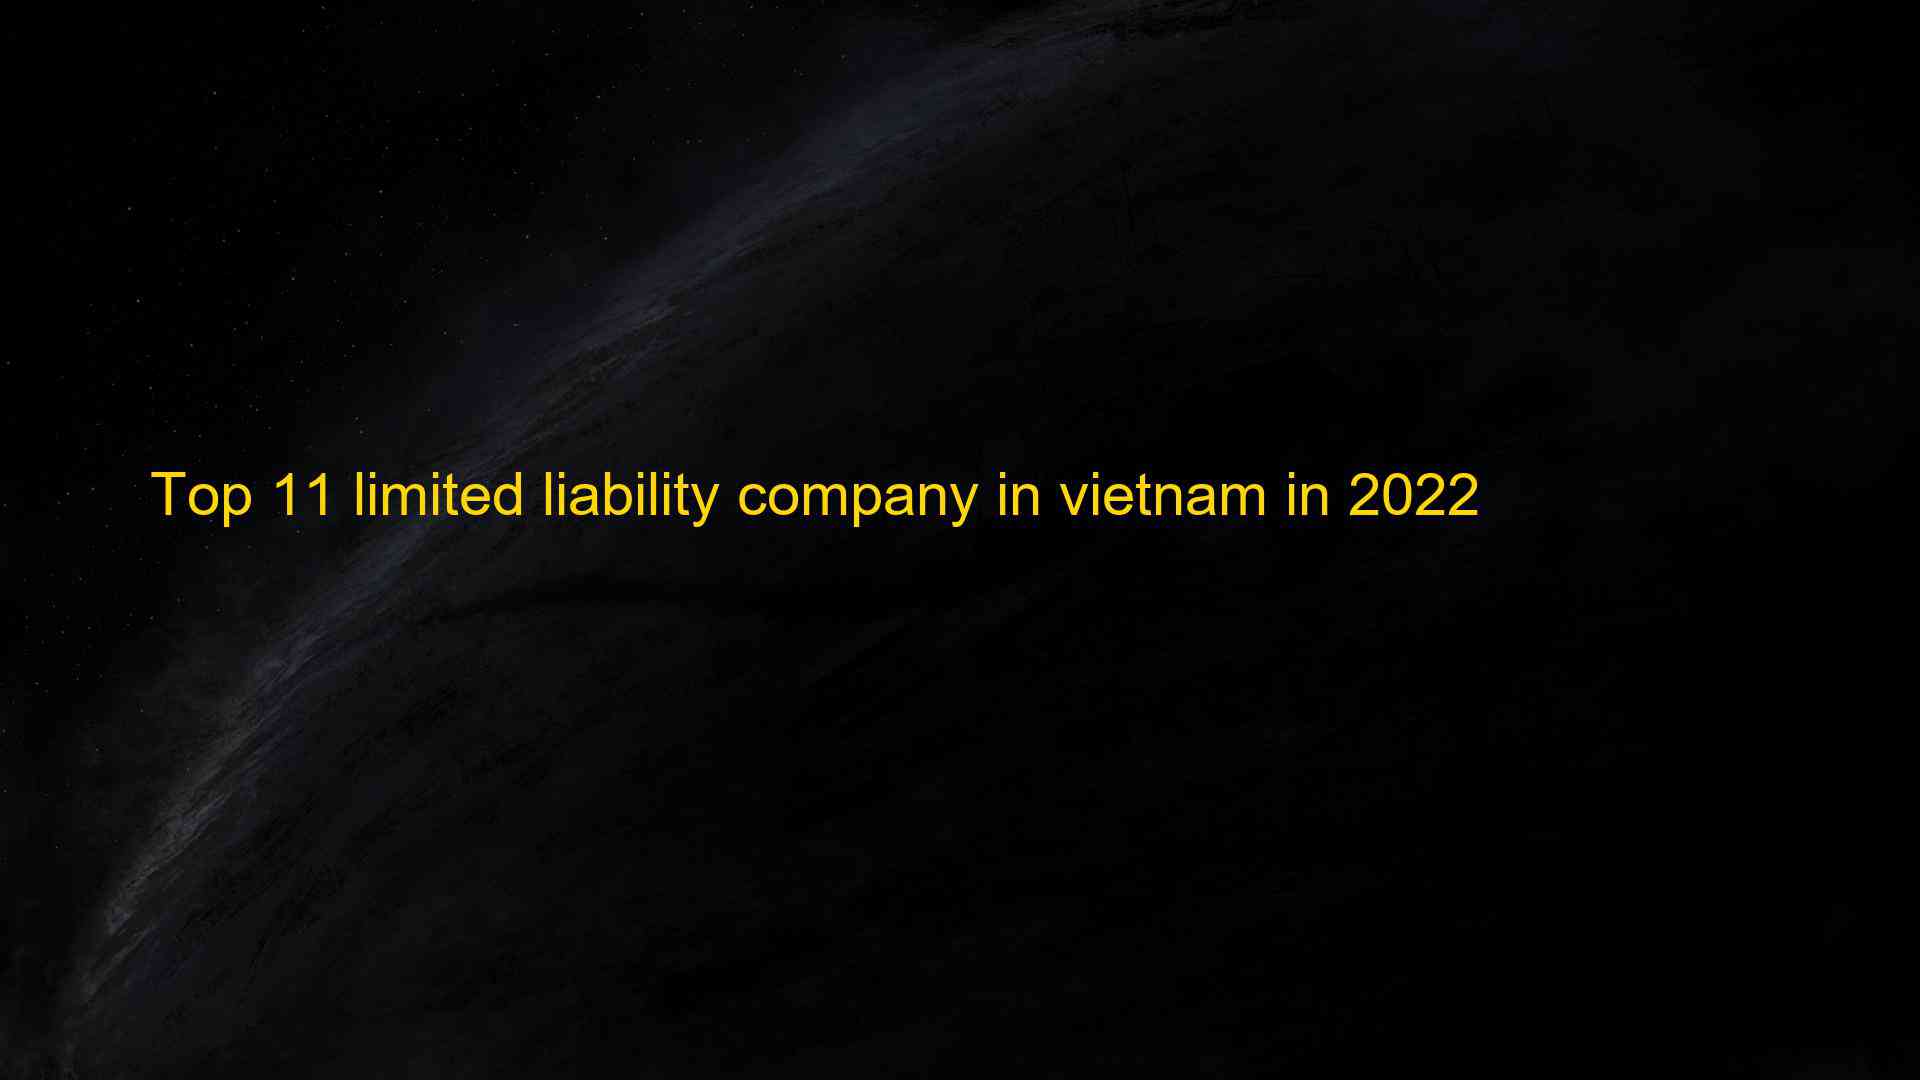 Top 11 limited liability company in vietnam in 2022 1660078519